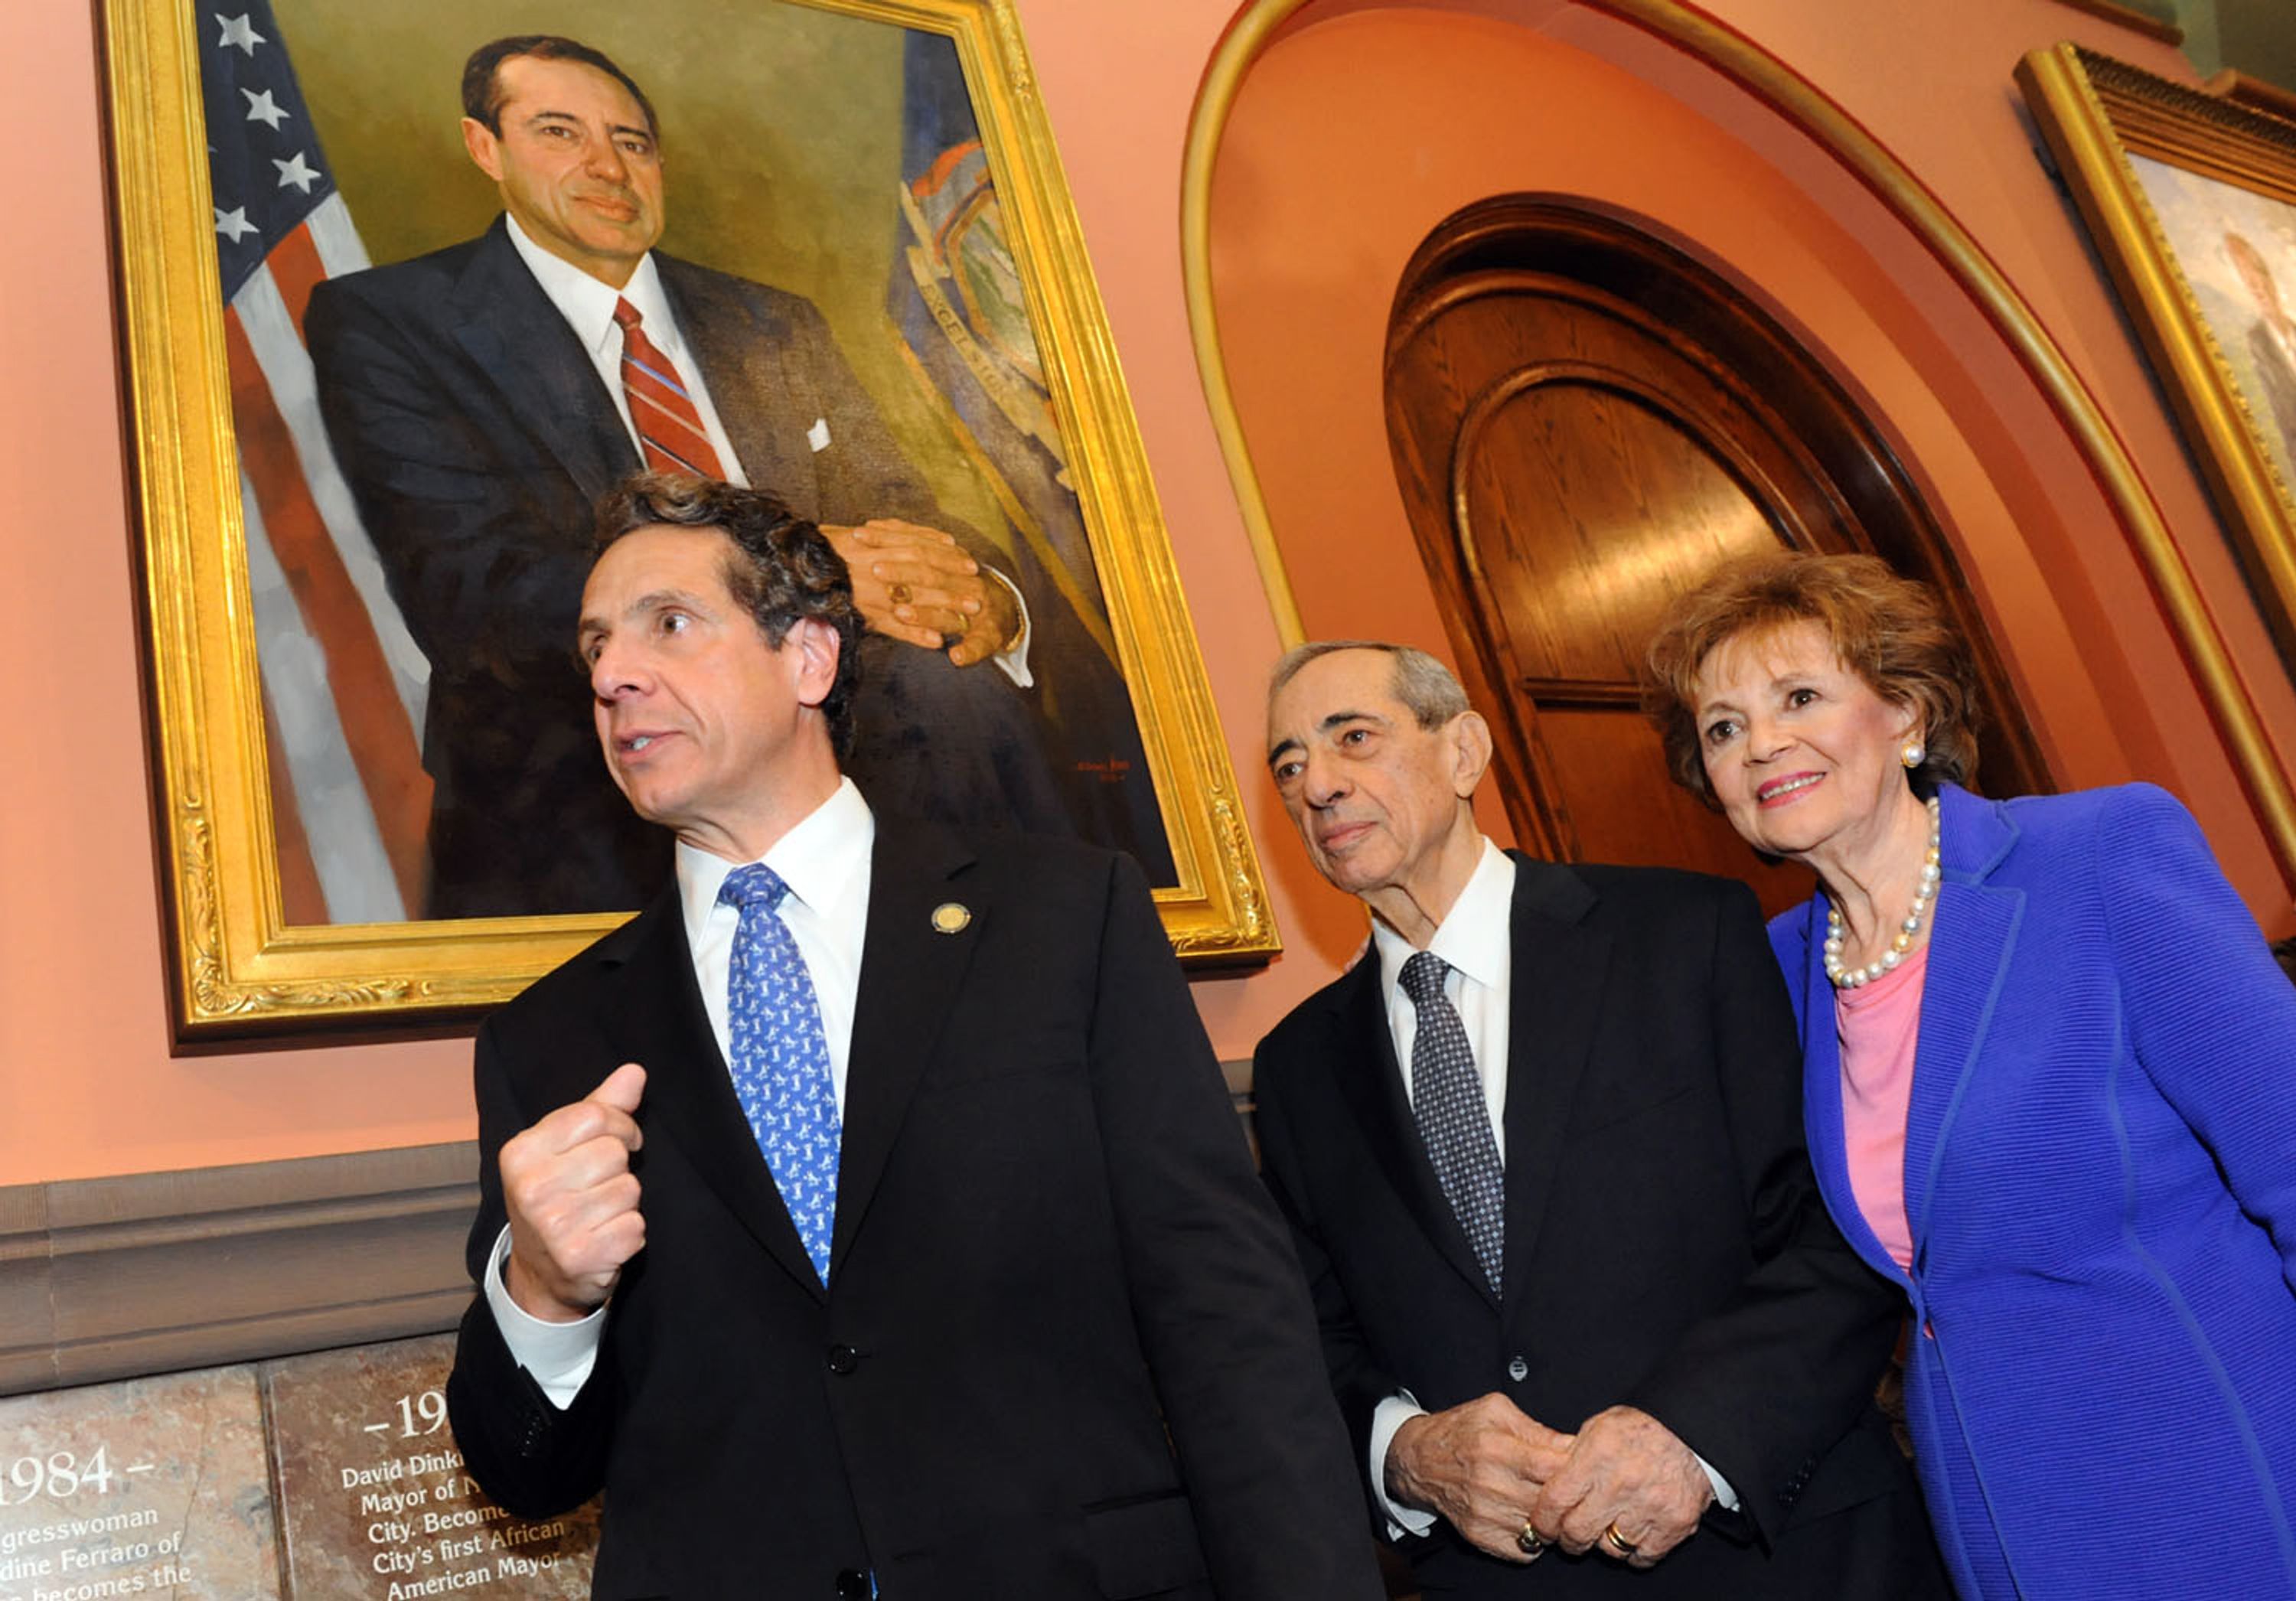 New York Gov. Andrew Cuomo joins his father, left; former Gov. Mario Cuomo, and mother, former first lady Matilda Cuomo, as the elder Cuomo's portrait is revealed in the Hall of Governors on Saturday, June 15, 2013, at the state Capitol in Albany, N.Y.